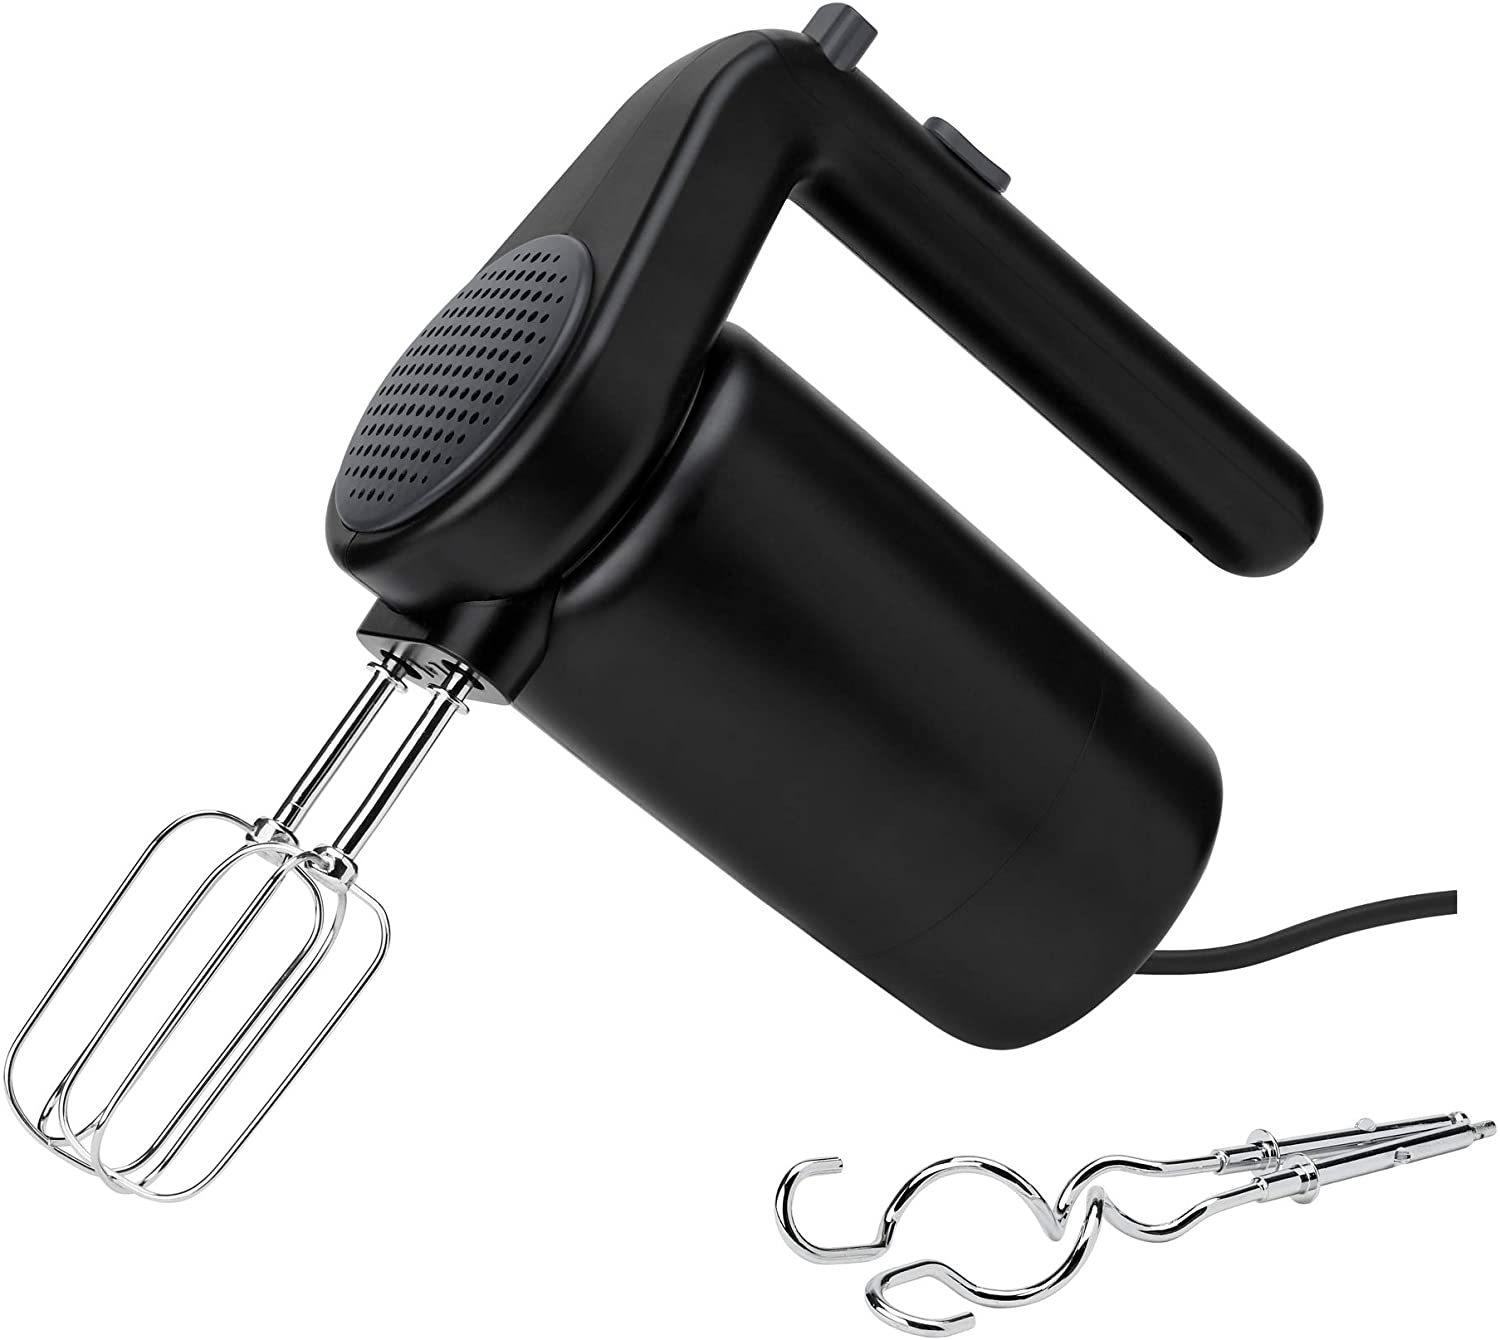 Stelton RIG-TIG FOODIE Hand Mixer - Electric Whisk, 3-Stage Hand Mixer for Baking, for Dough & Whipped Cream - Made of Plastic & Stainless Steel - Cable Compartment - Ergonomic Handle - Black